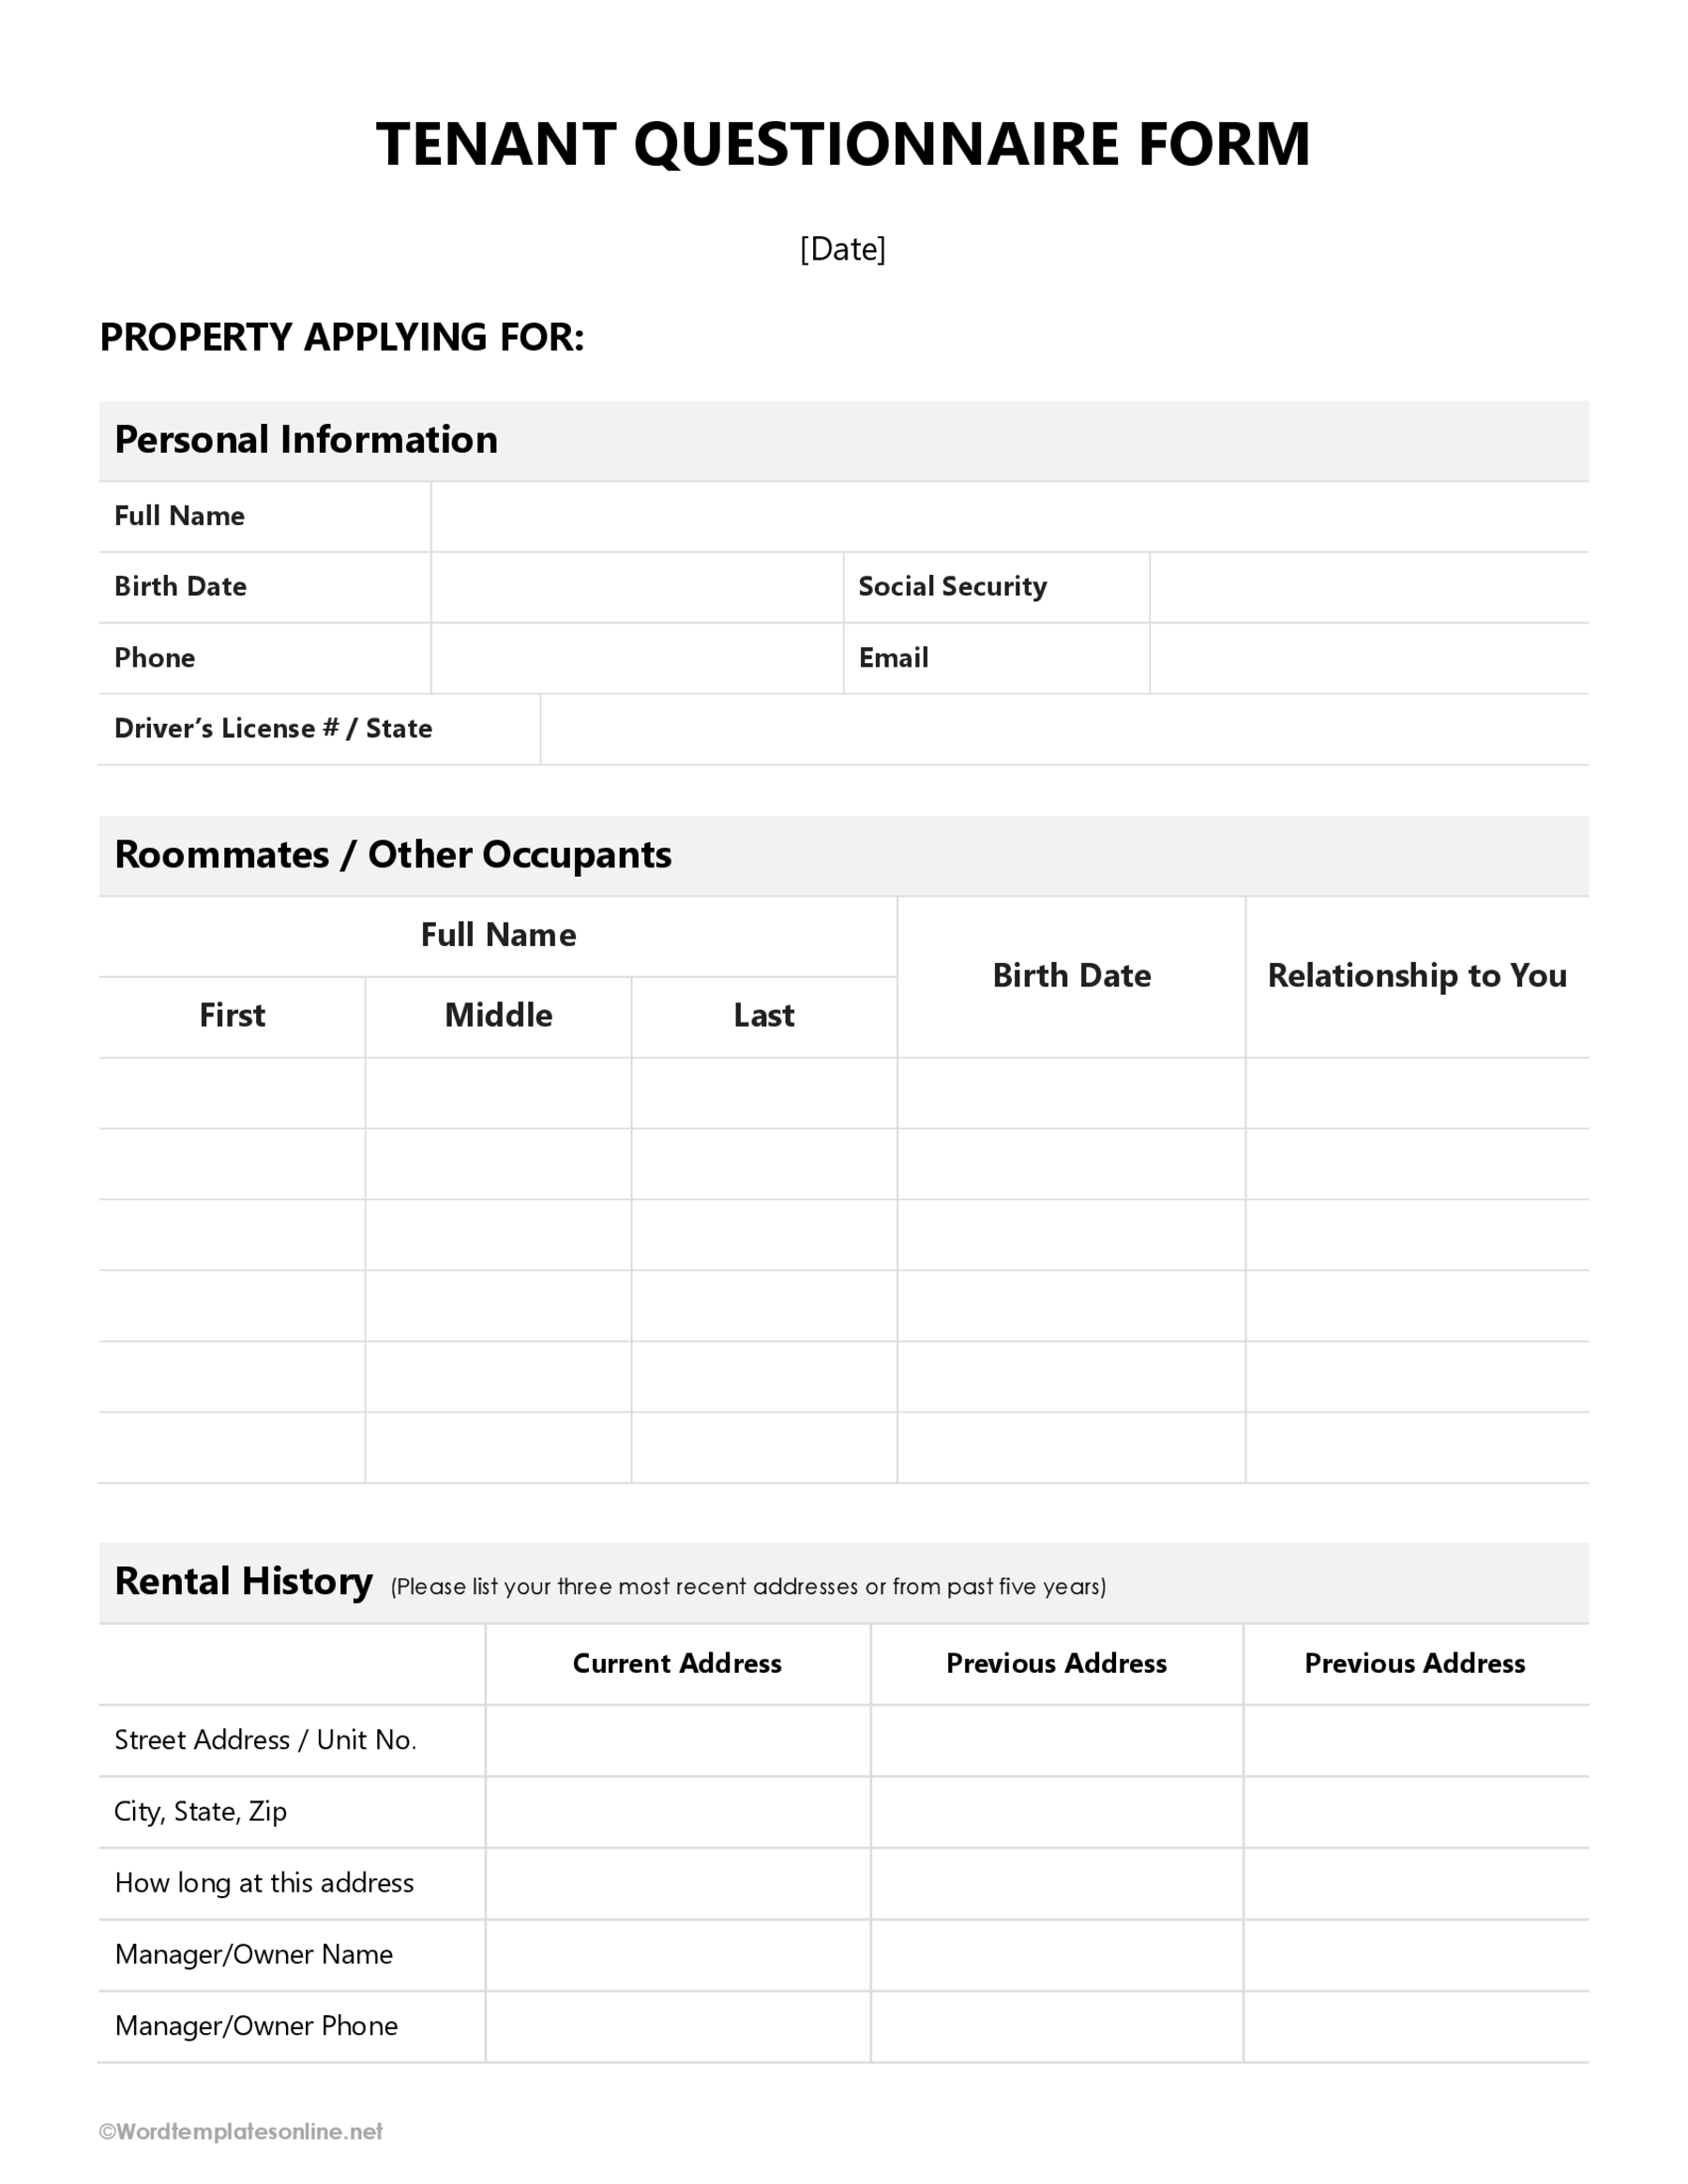 Free Tenant Questionnaire Form Template Example